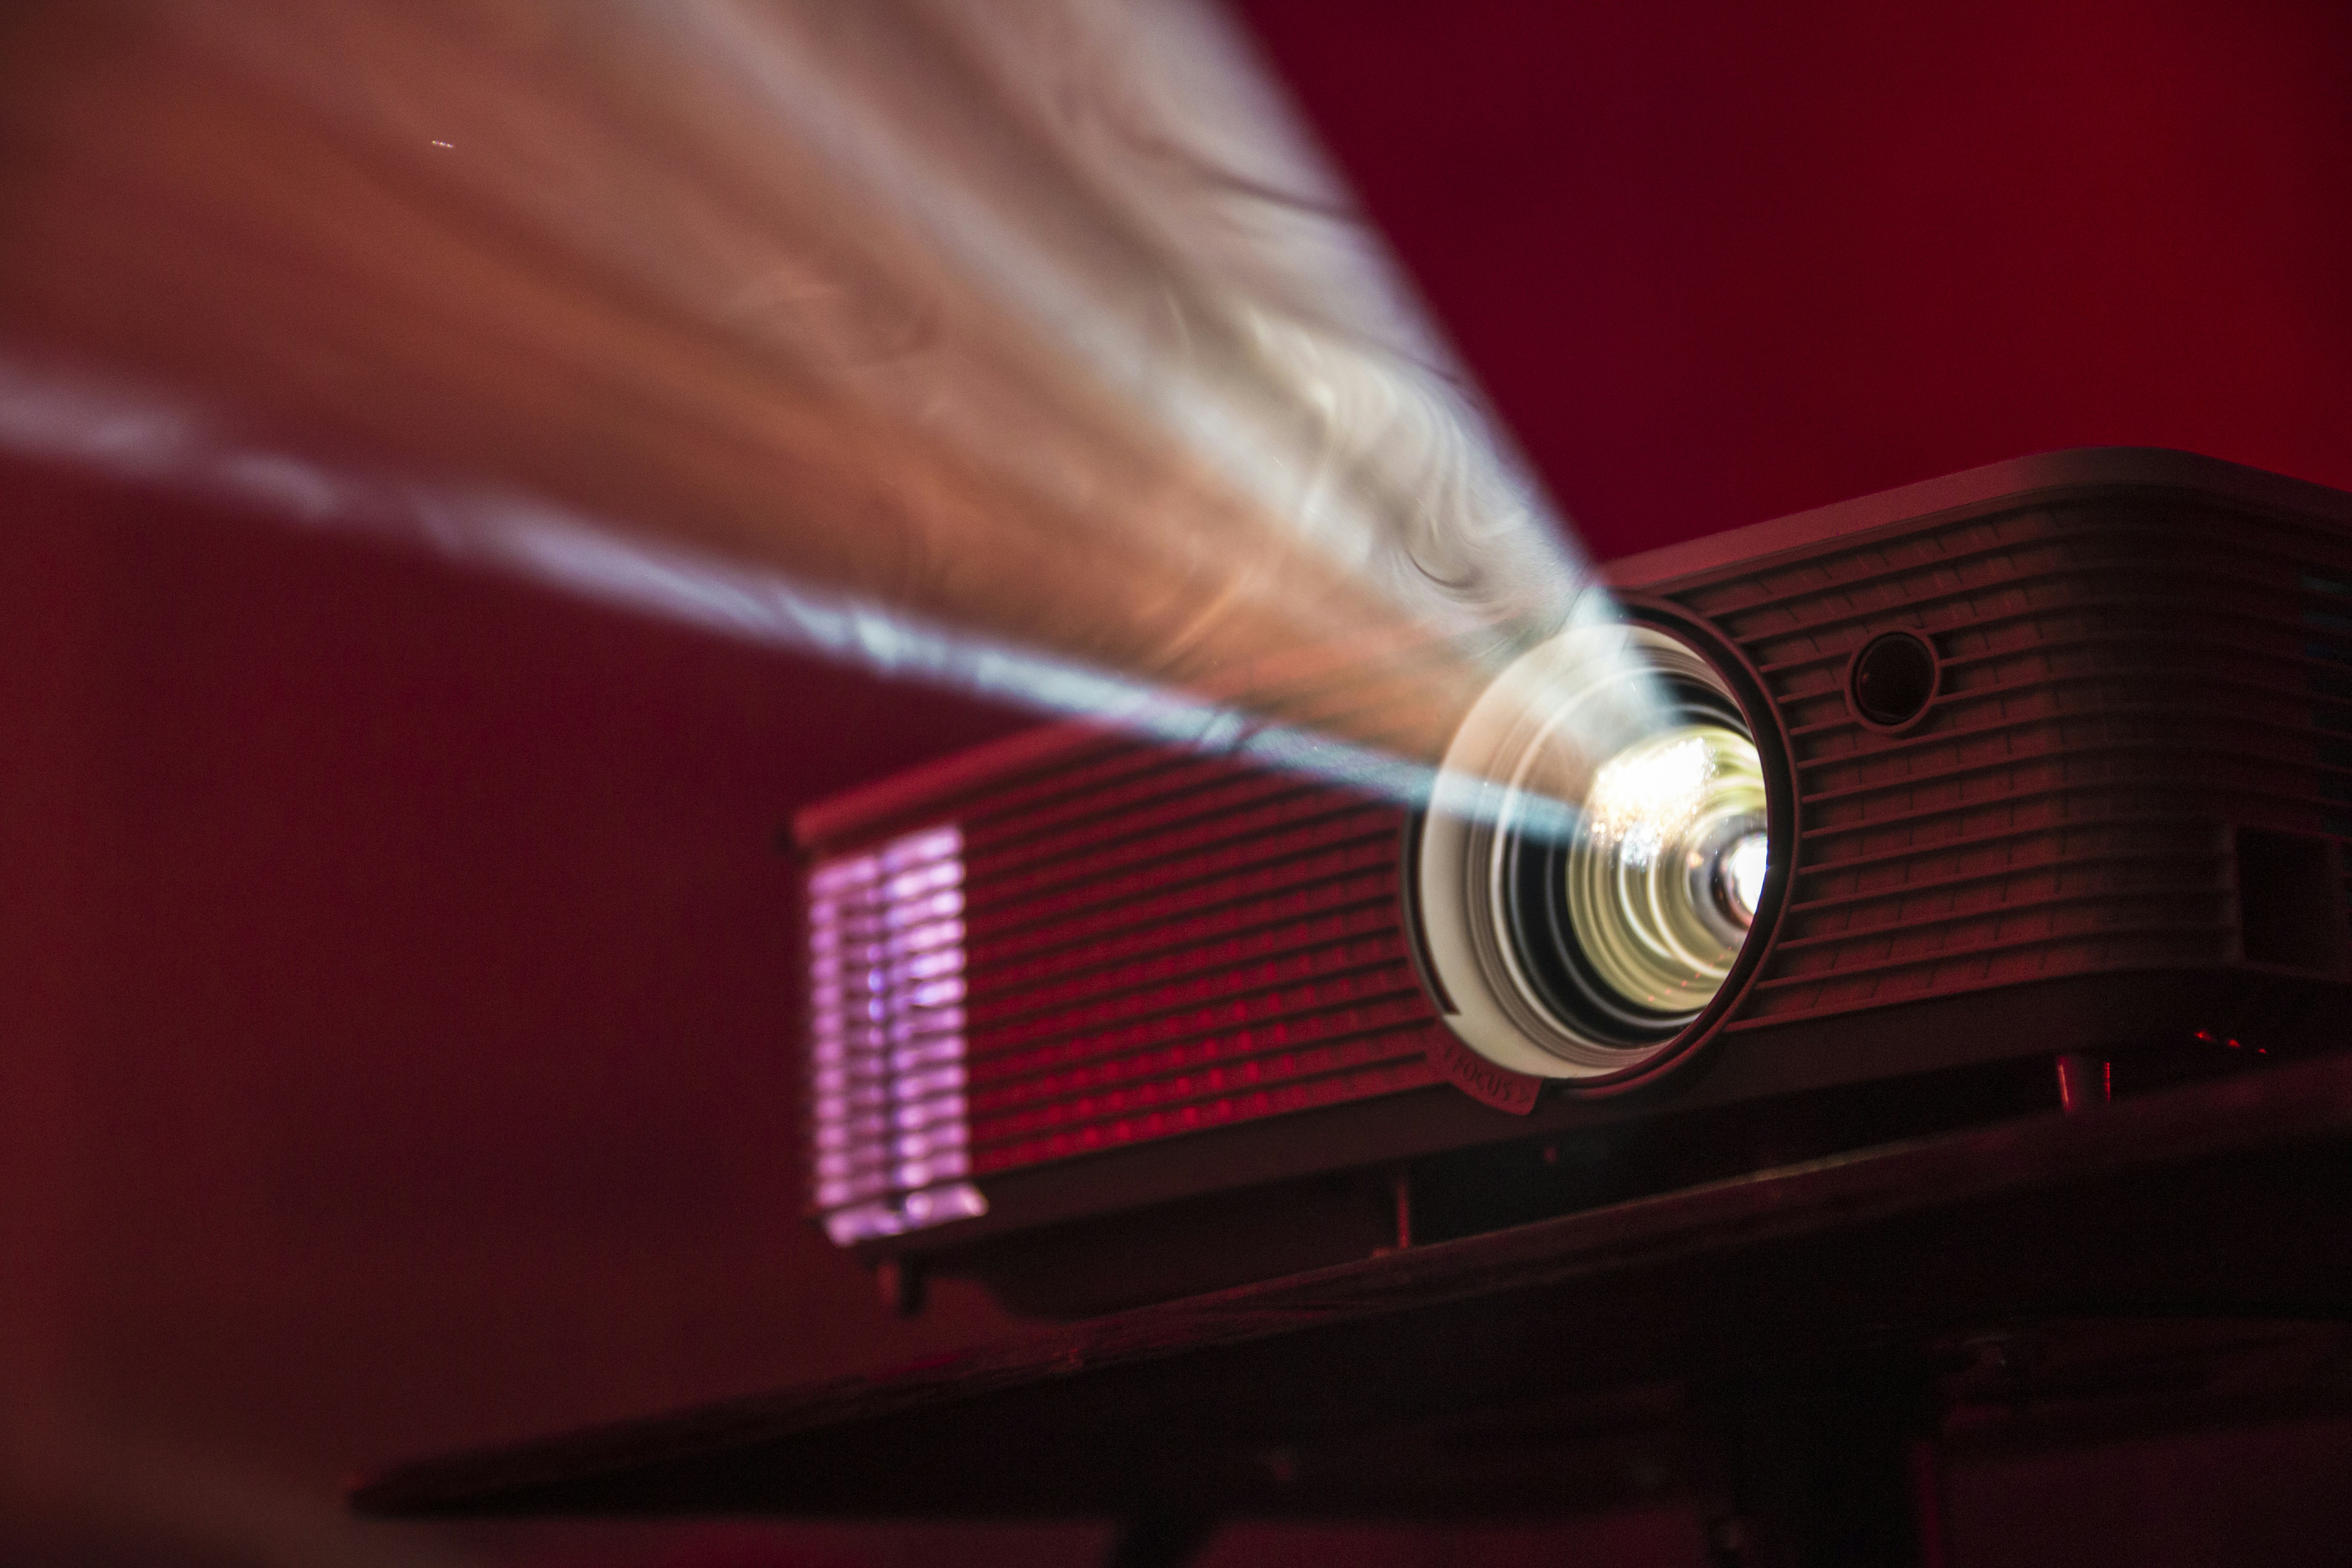 A projector shines the white light of an image against a dark maroon background.